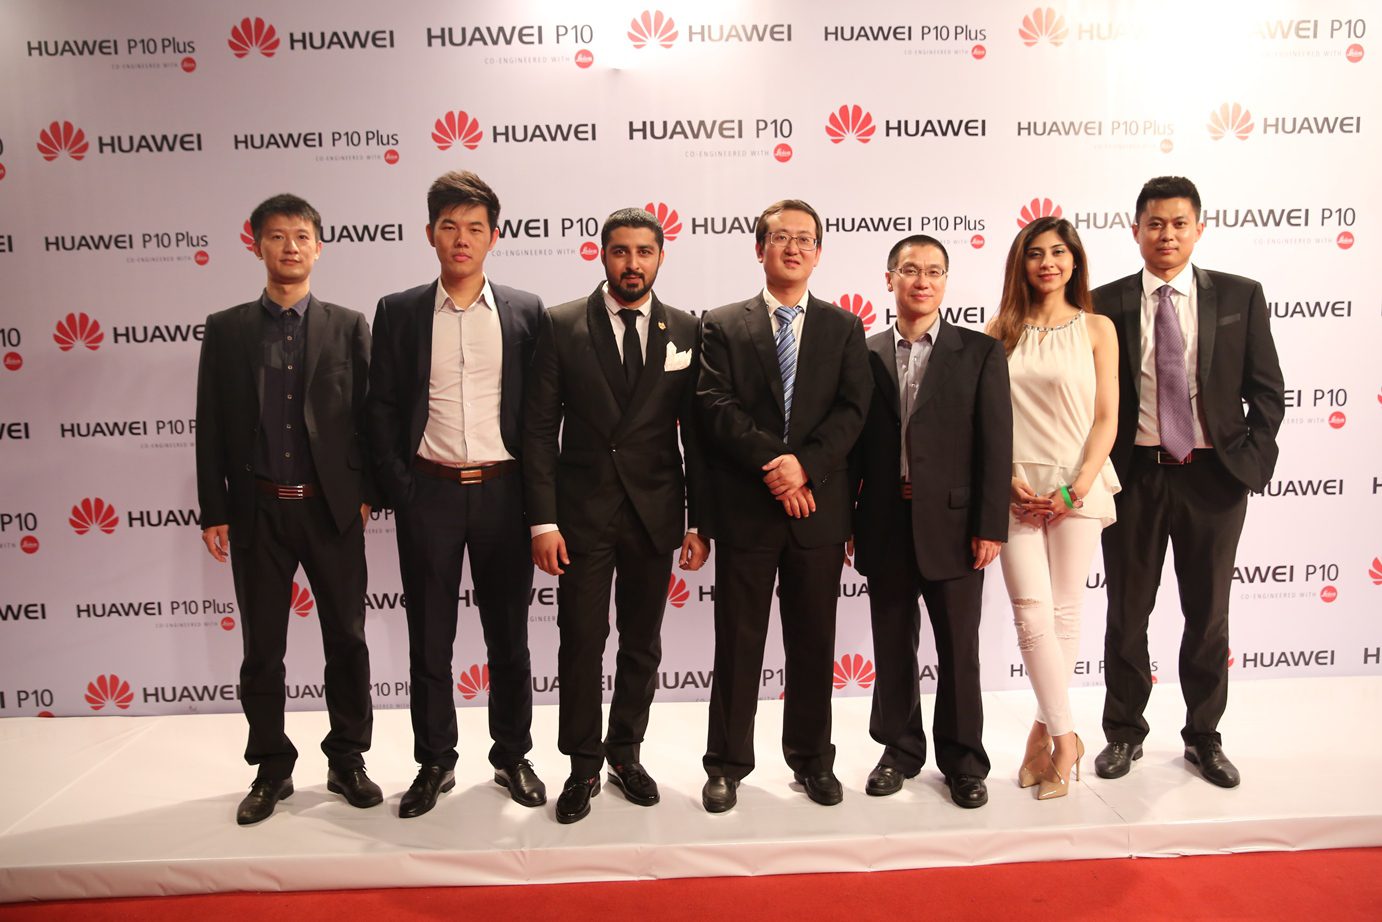 Huawei P10 and P10 Plus launch event held in Karachi